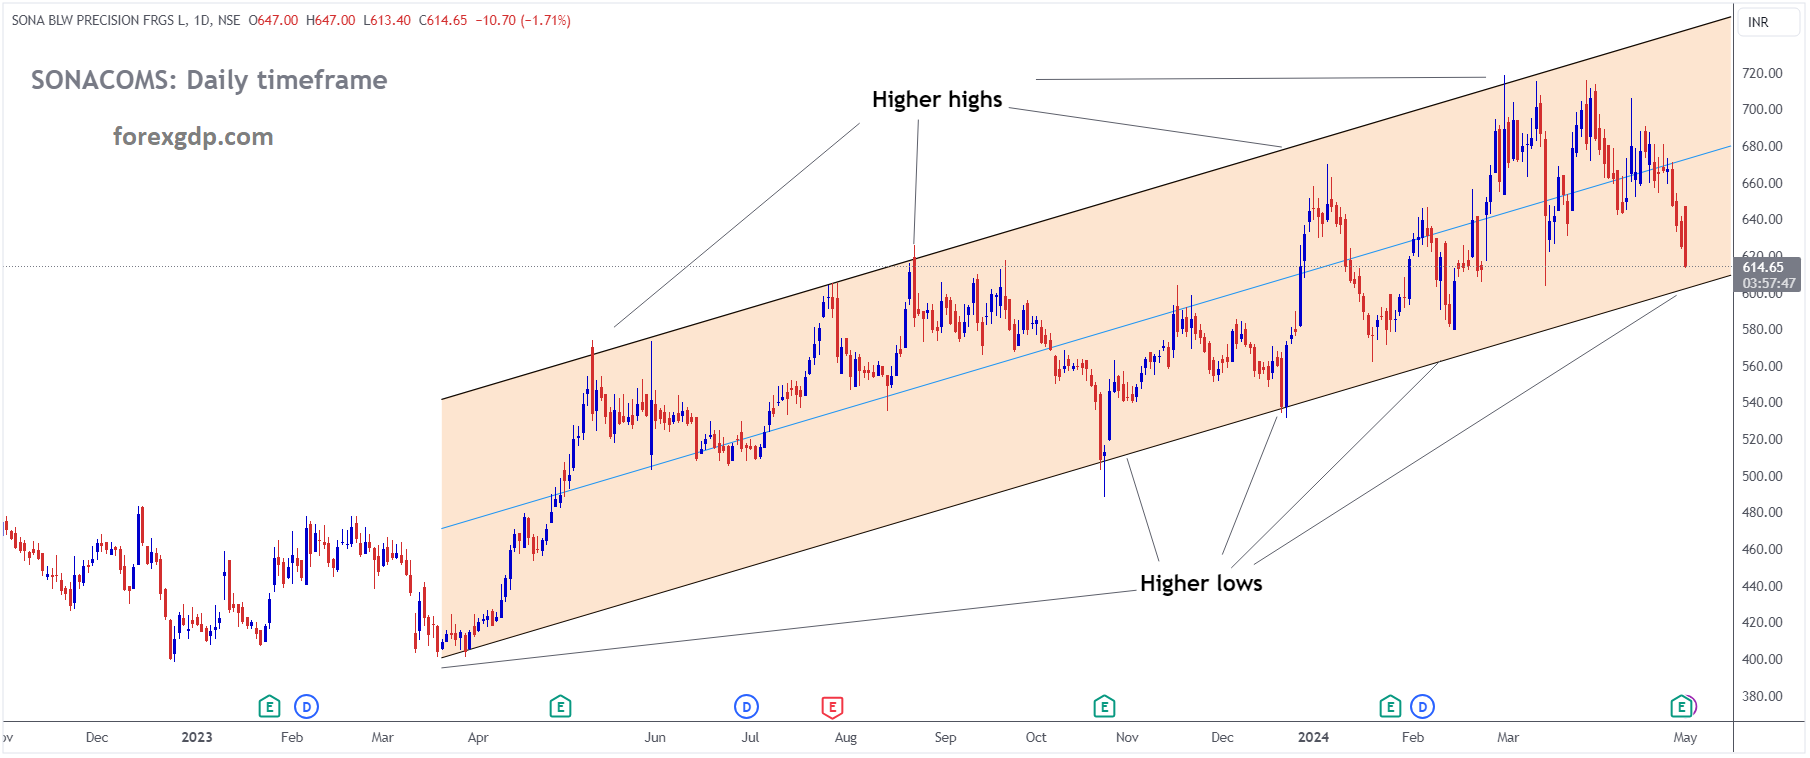 SONA BLW PRECISION FRGS Market Price is moving in Ascending channel and market has reached higher low area of the channel